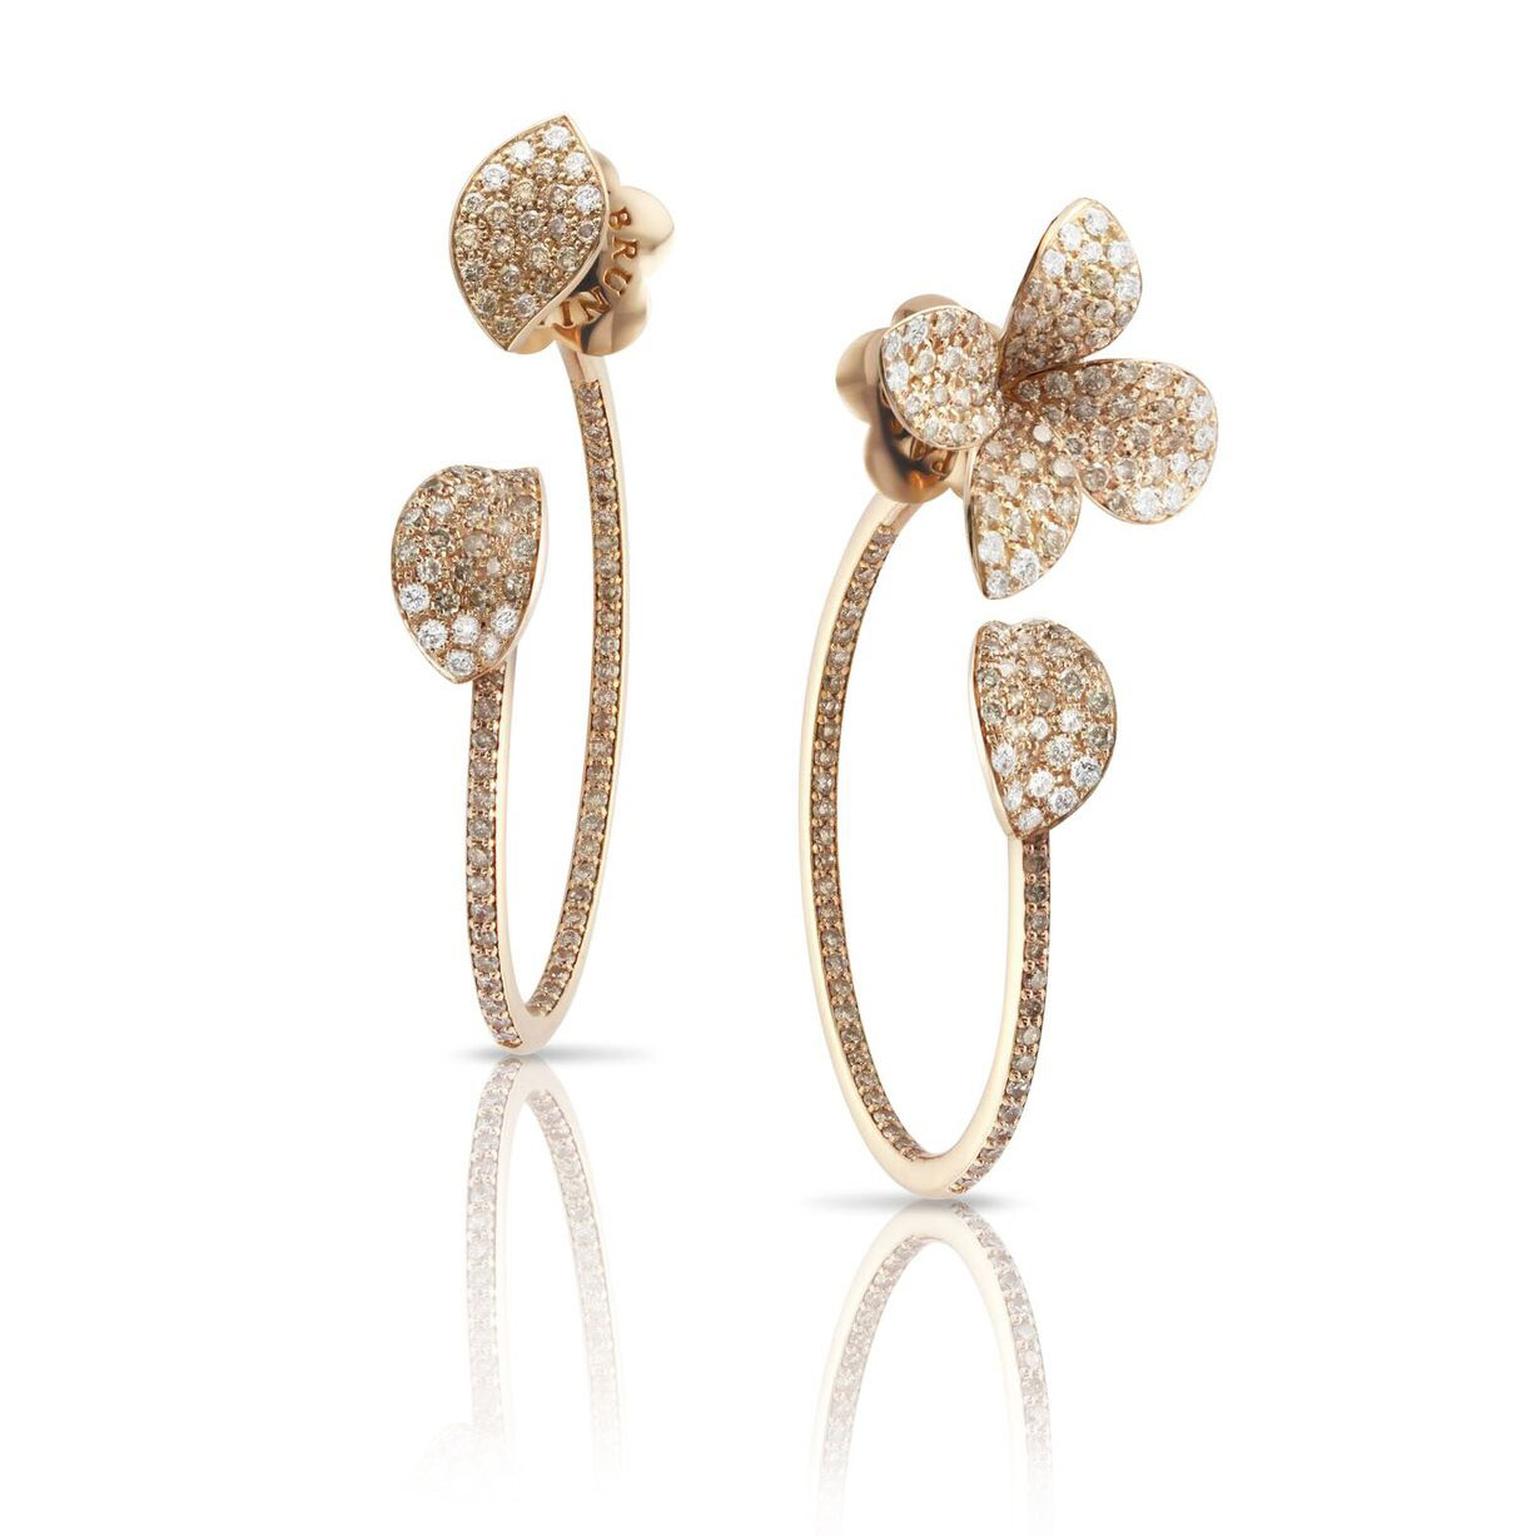 Floral jewellery gets a modern makeover for spring 